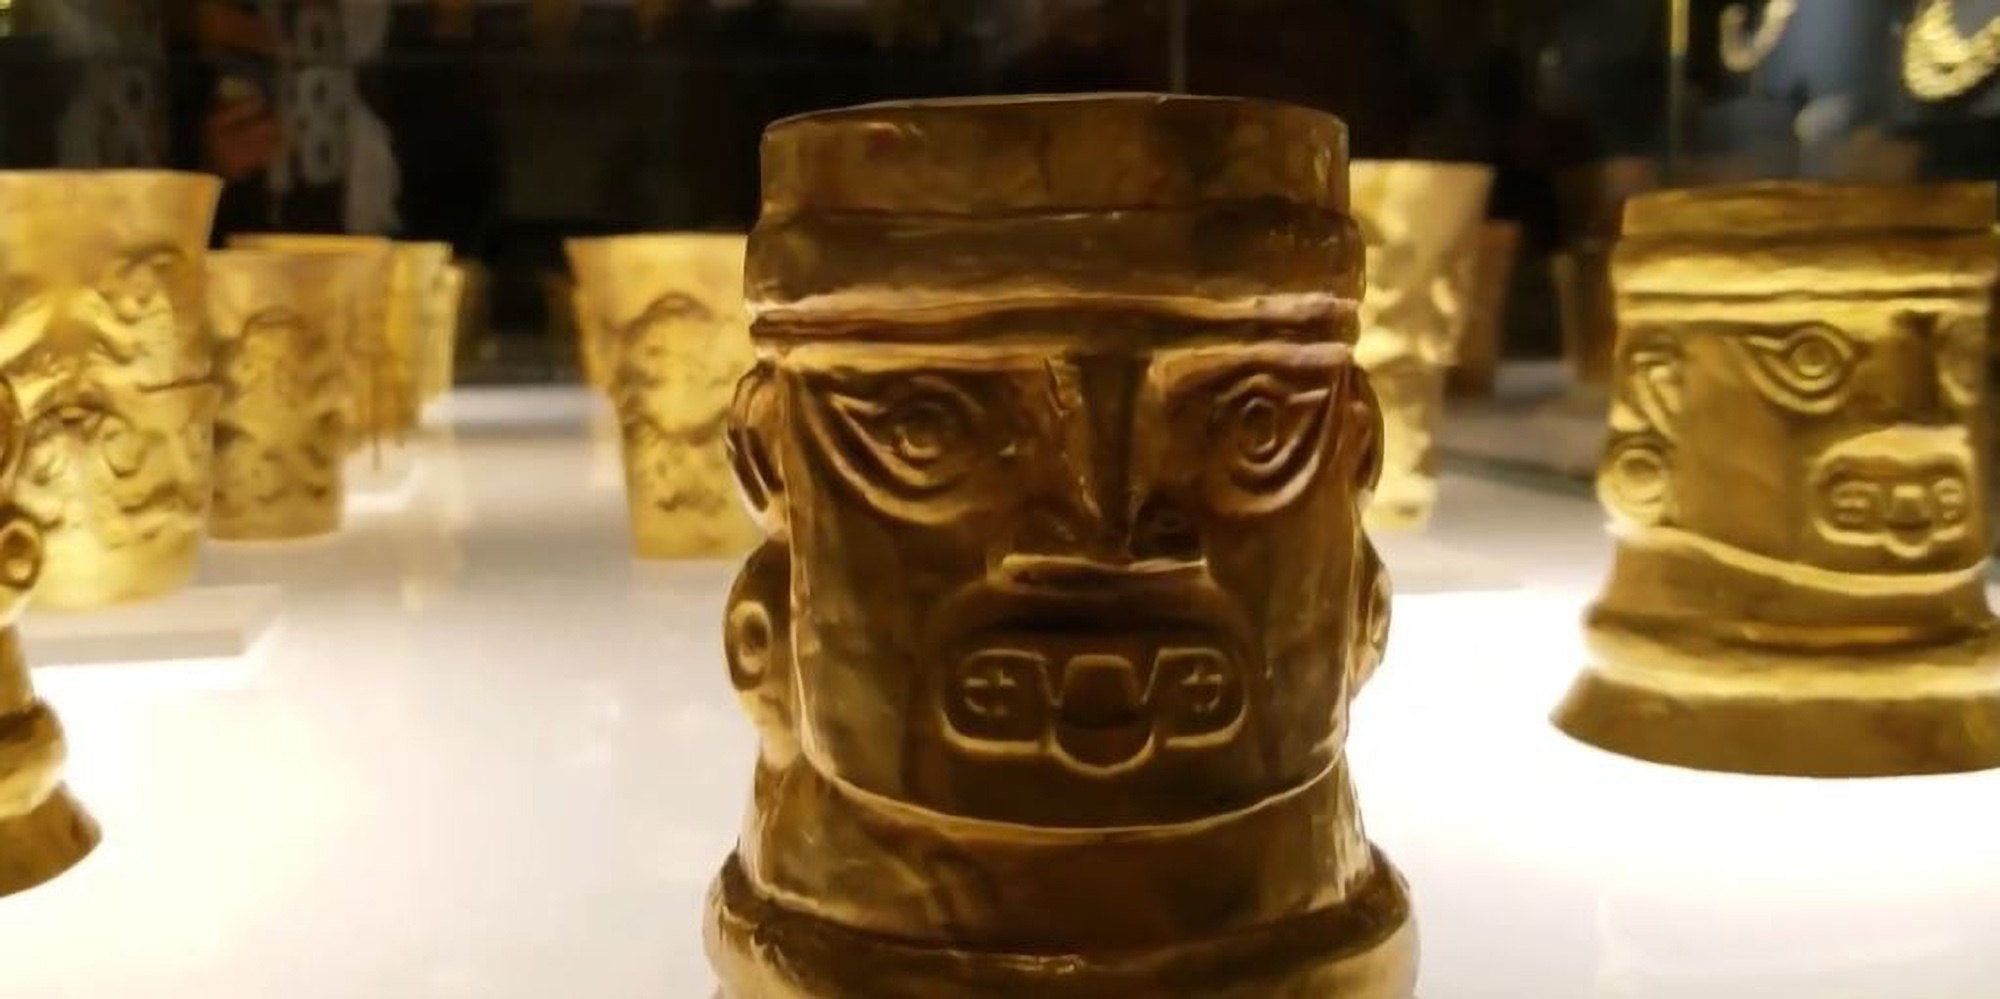 Read more about the article OLD FINGER: Ancient Gold Treasures Plundered From Museum By Hooded Gunmen In Broad Daylight